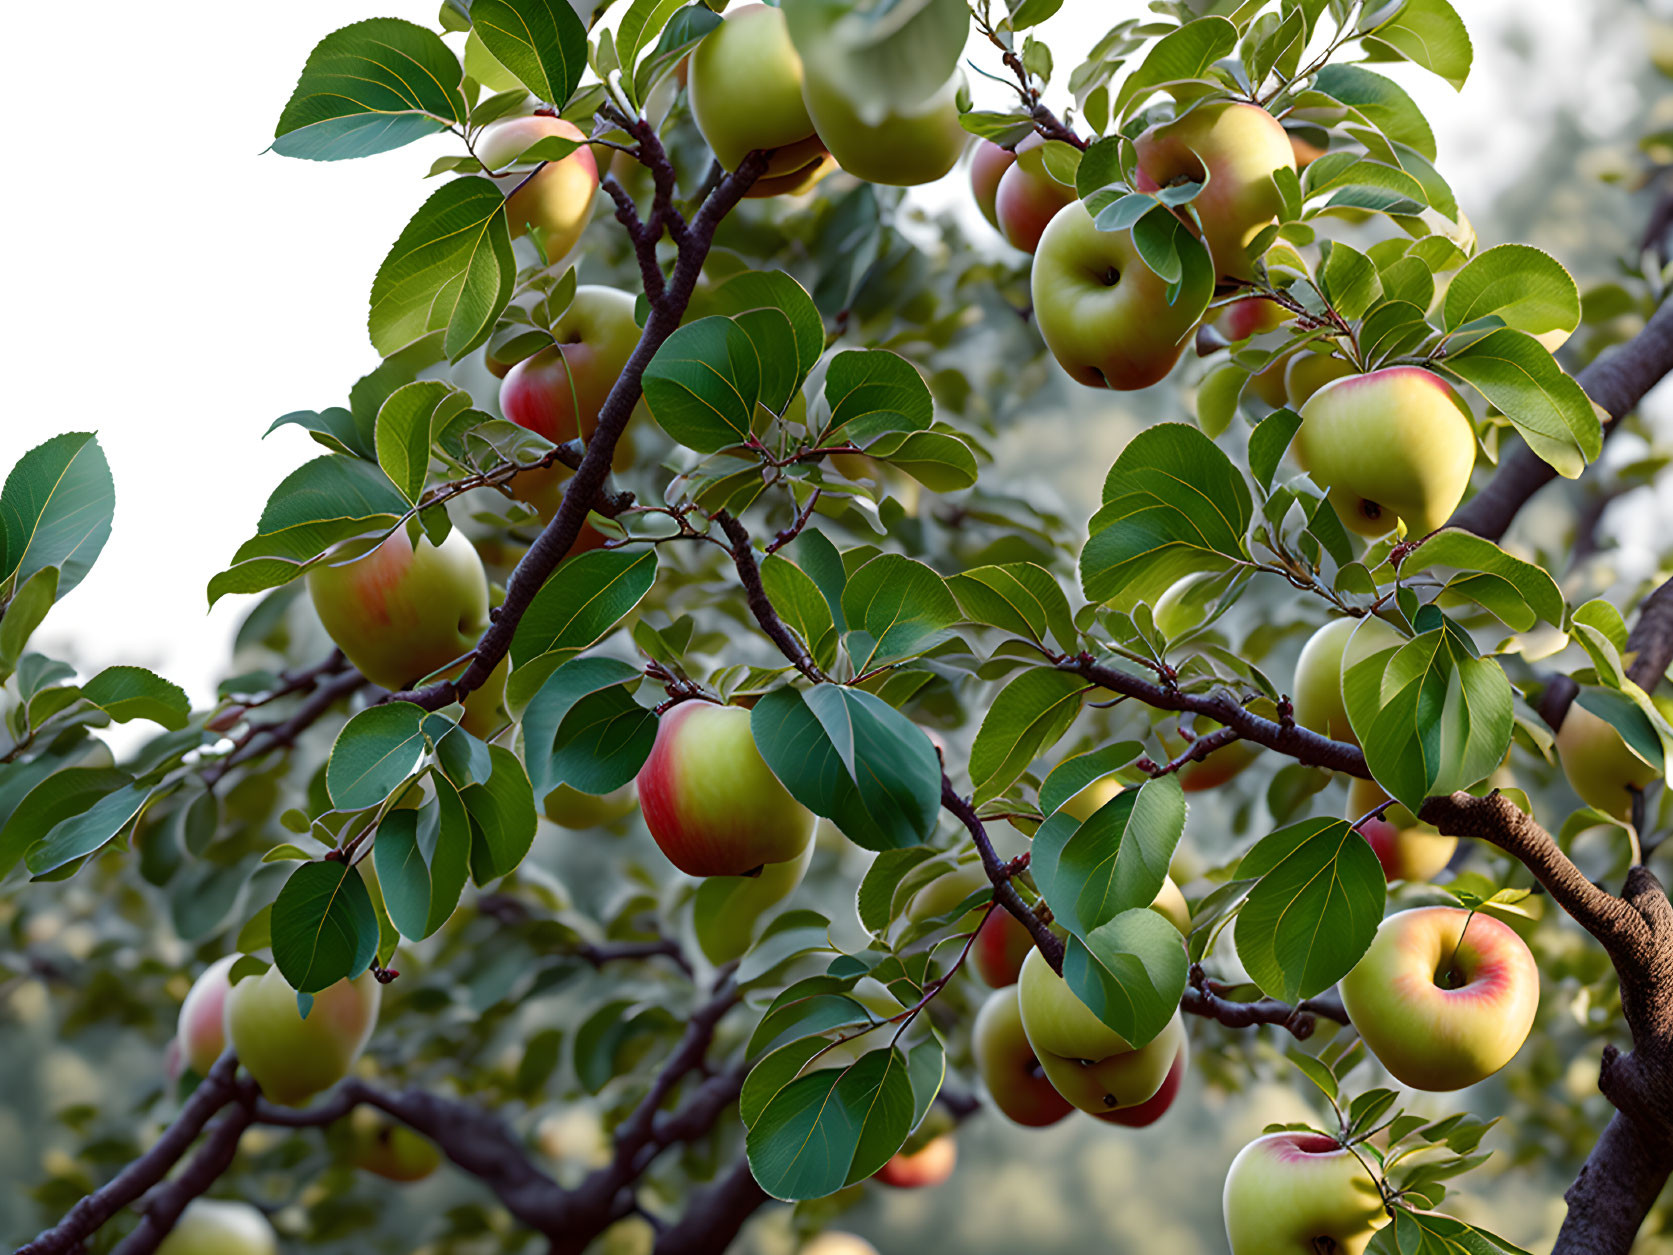 Branches full of apples realistic home photography